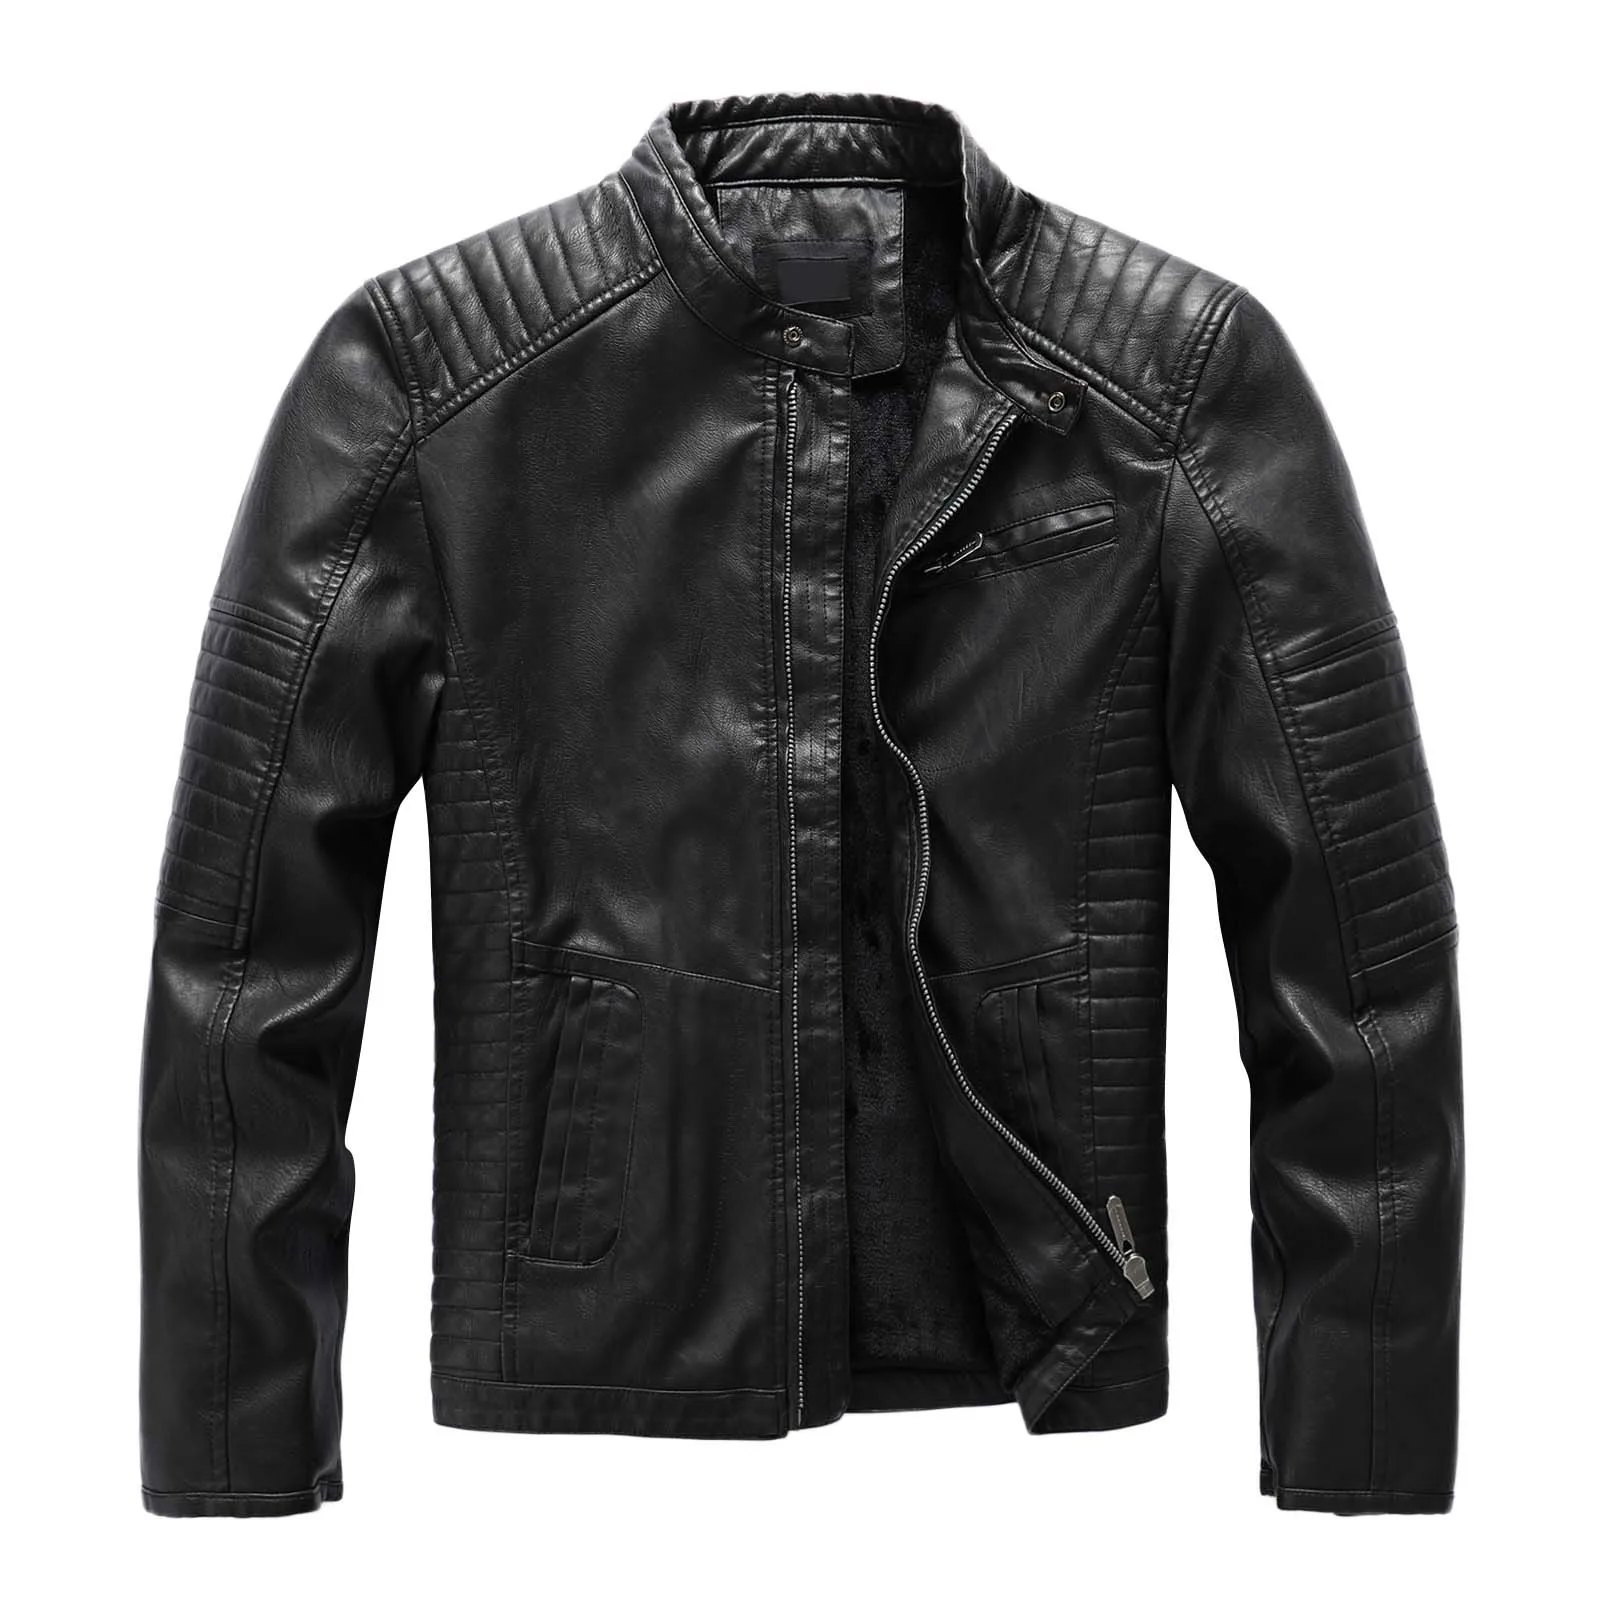 Charcoal Jacket Mens Leather Jackets Autumn And Winter PU Leather Jacket Stand Collar With 850 down Jacket Heavy Coats for Men